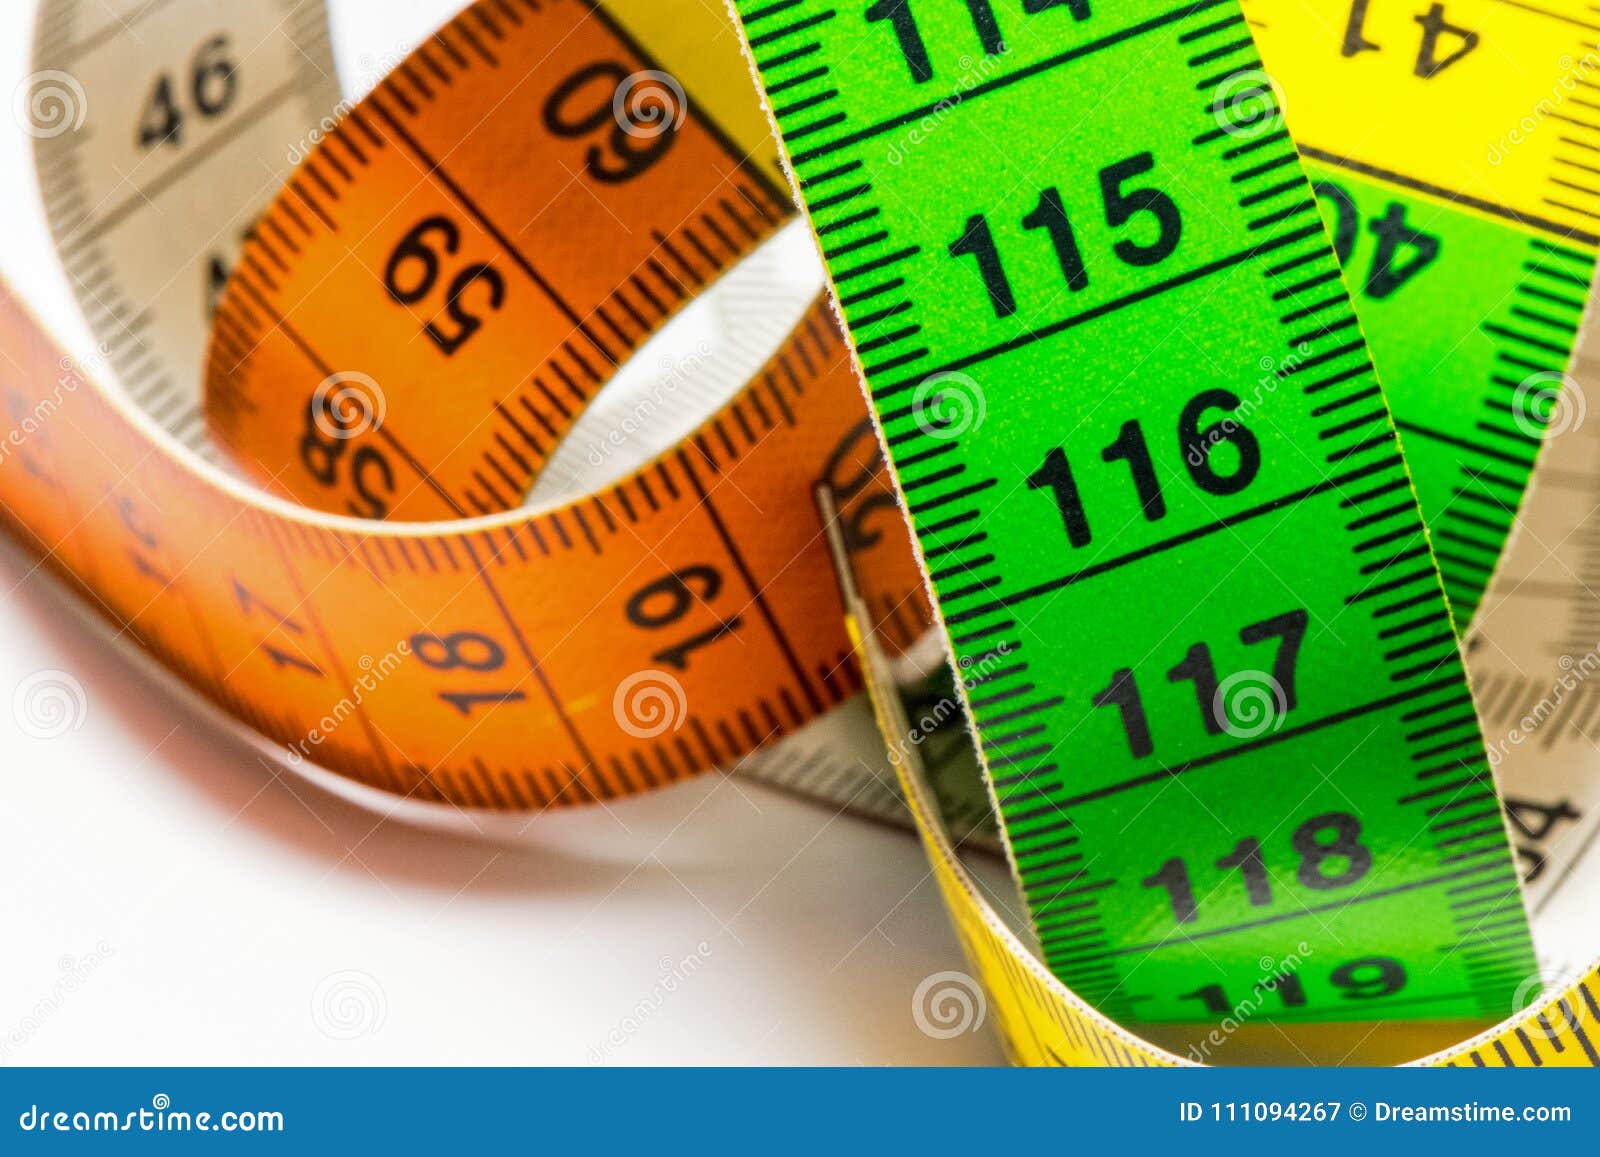 A Tape Measure As Used by People Who Make Their Own Clothes. Stock Image -  Image of clothes, beautiful: 111094191